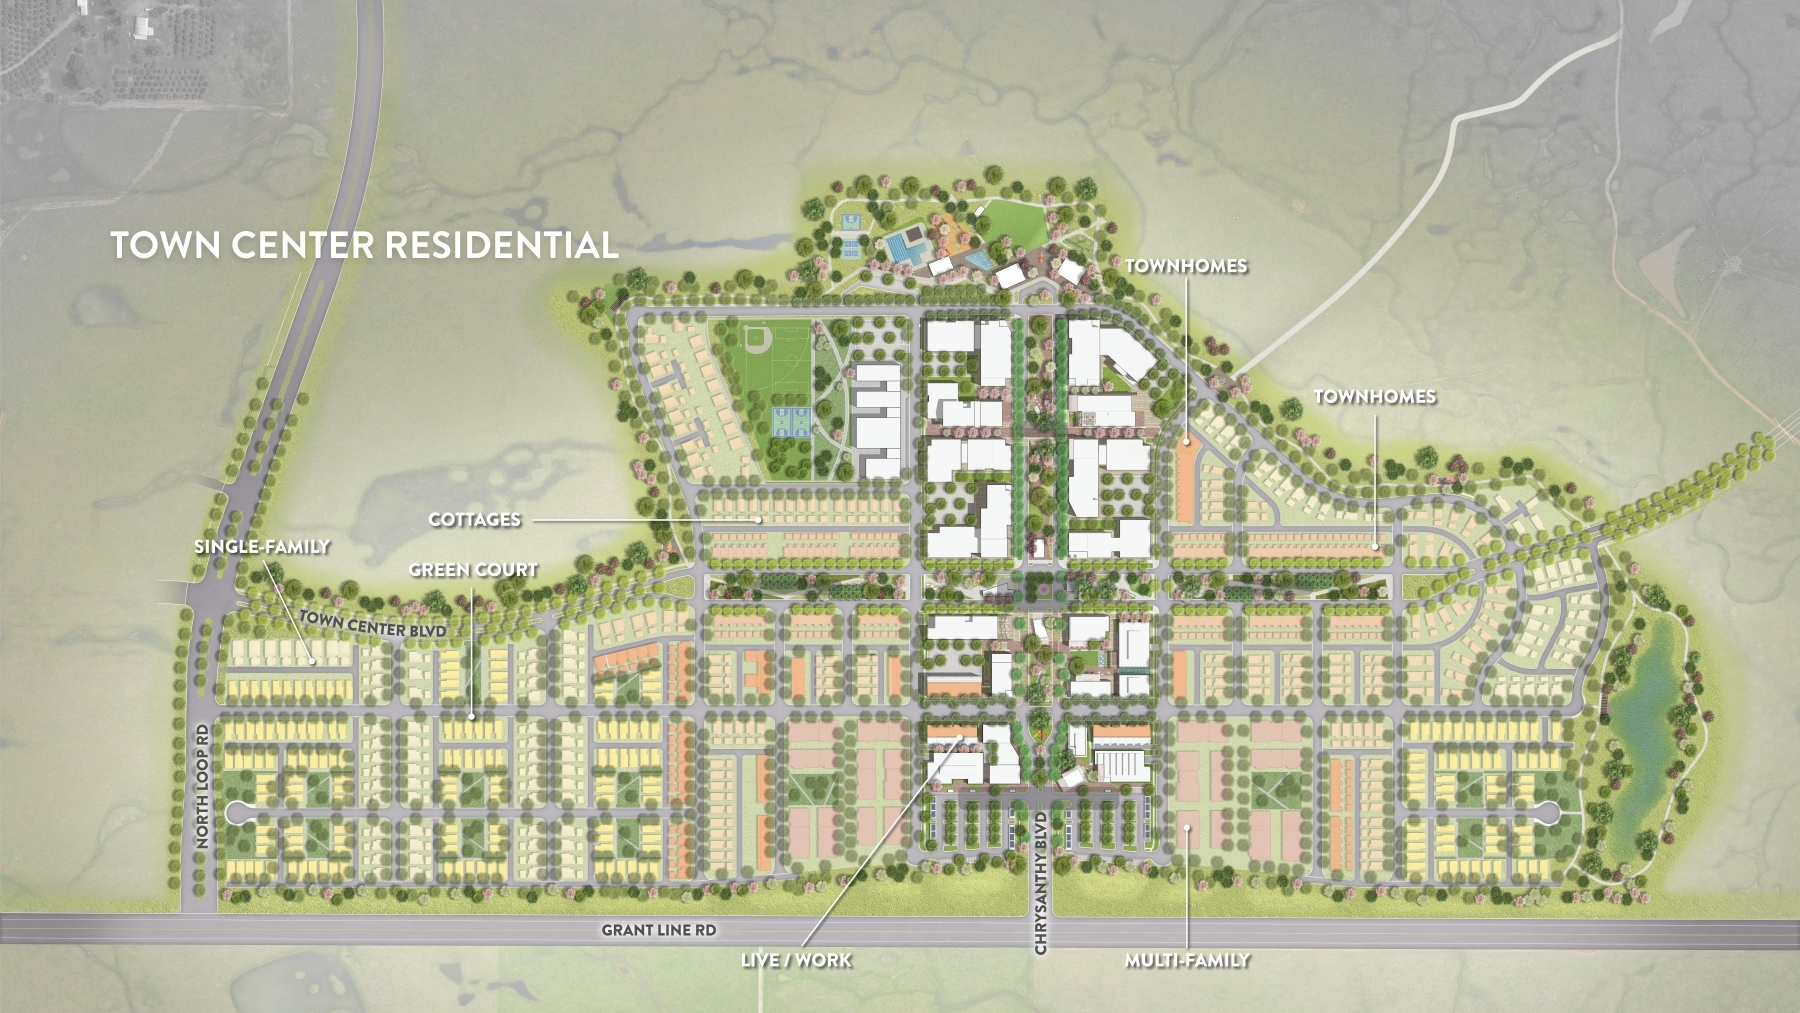 An illustrative map showing the Braden's Town Center that includes homes for all - townhomes, single-family homes, cottage style homes